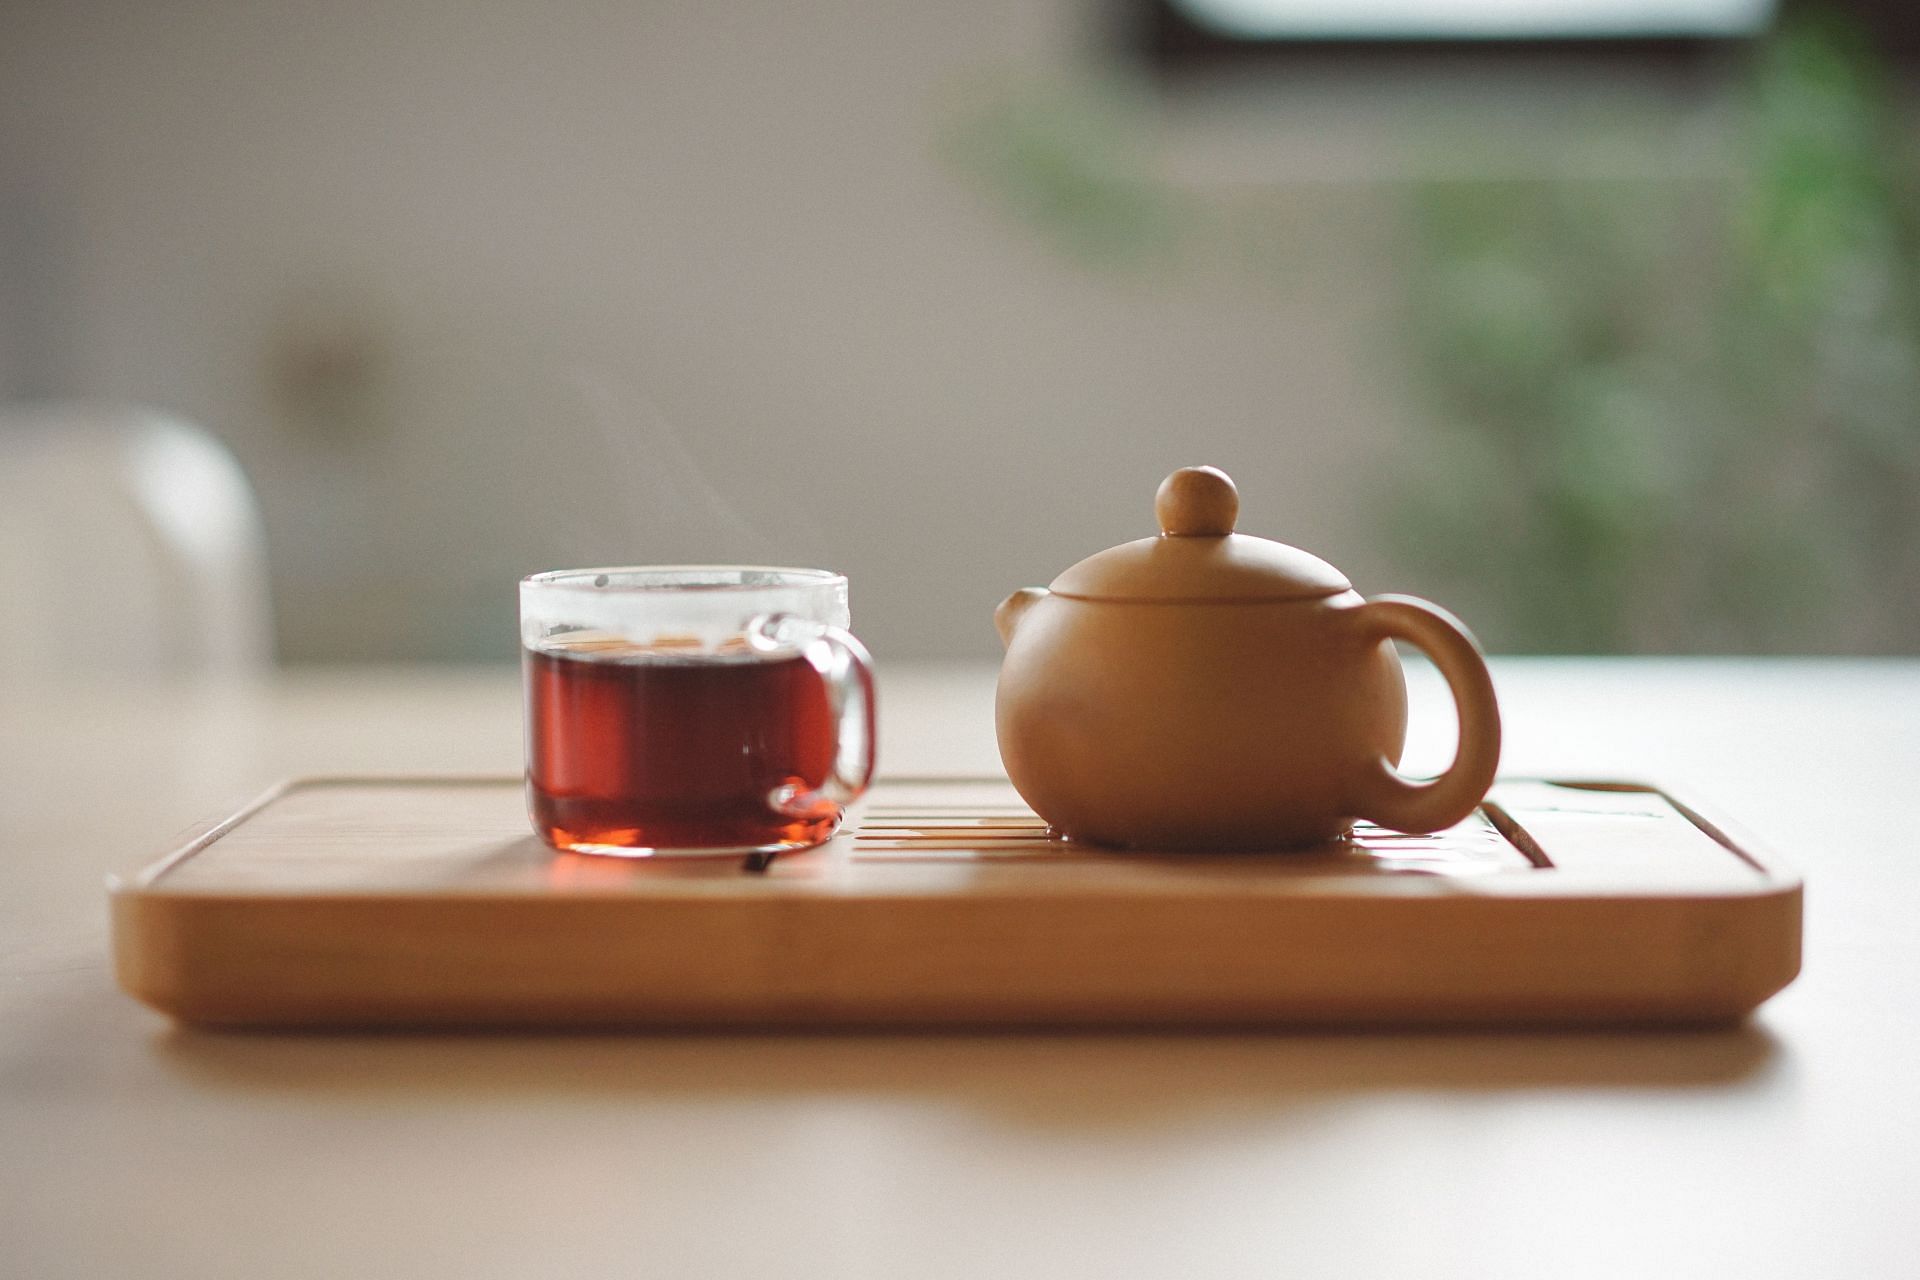 Tea is one of the best remedies for bloating and other digestive issues. (Image via Unsplash / Manki Kim)